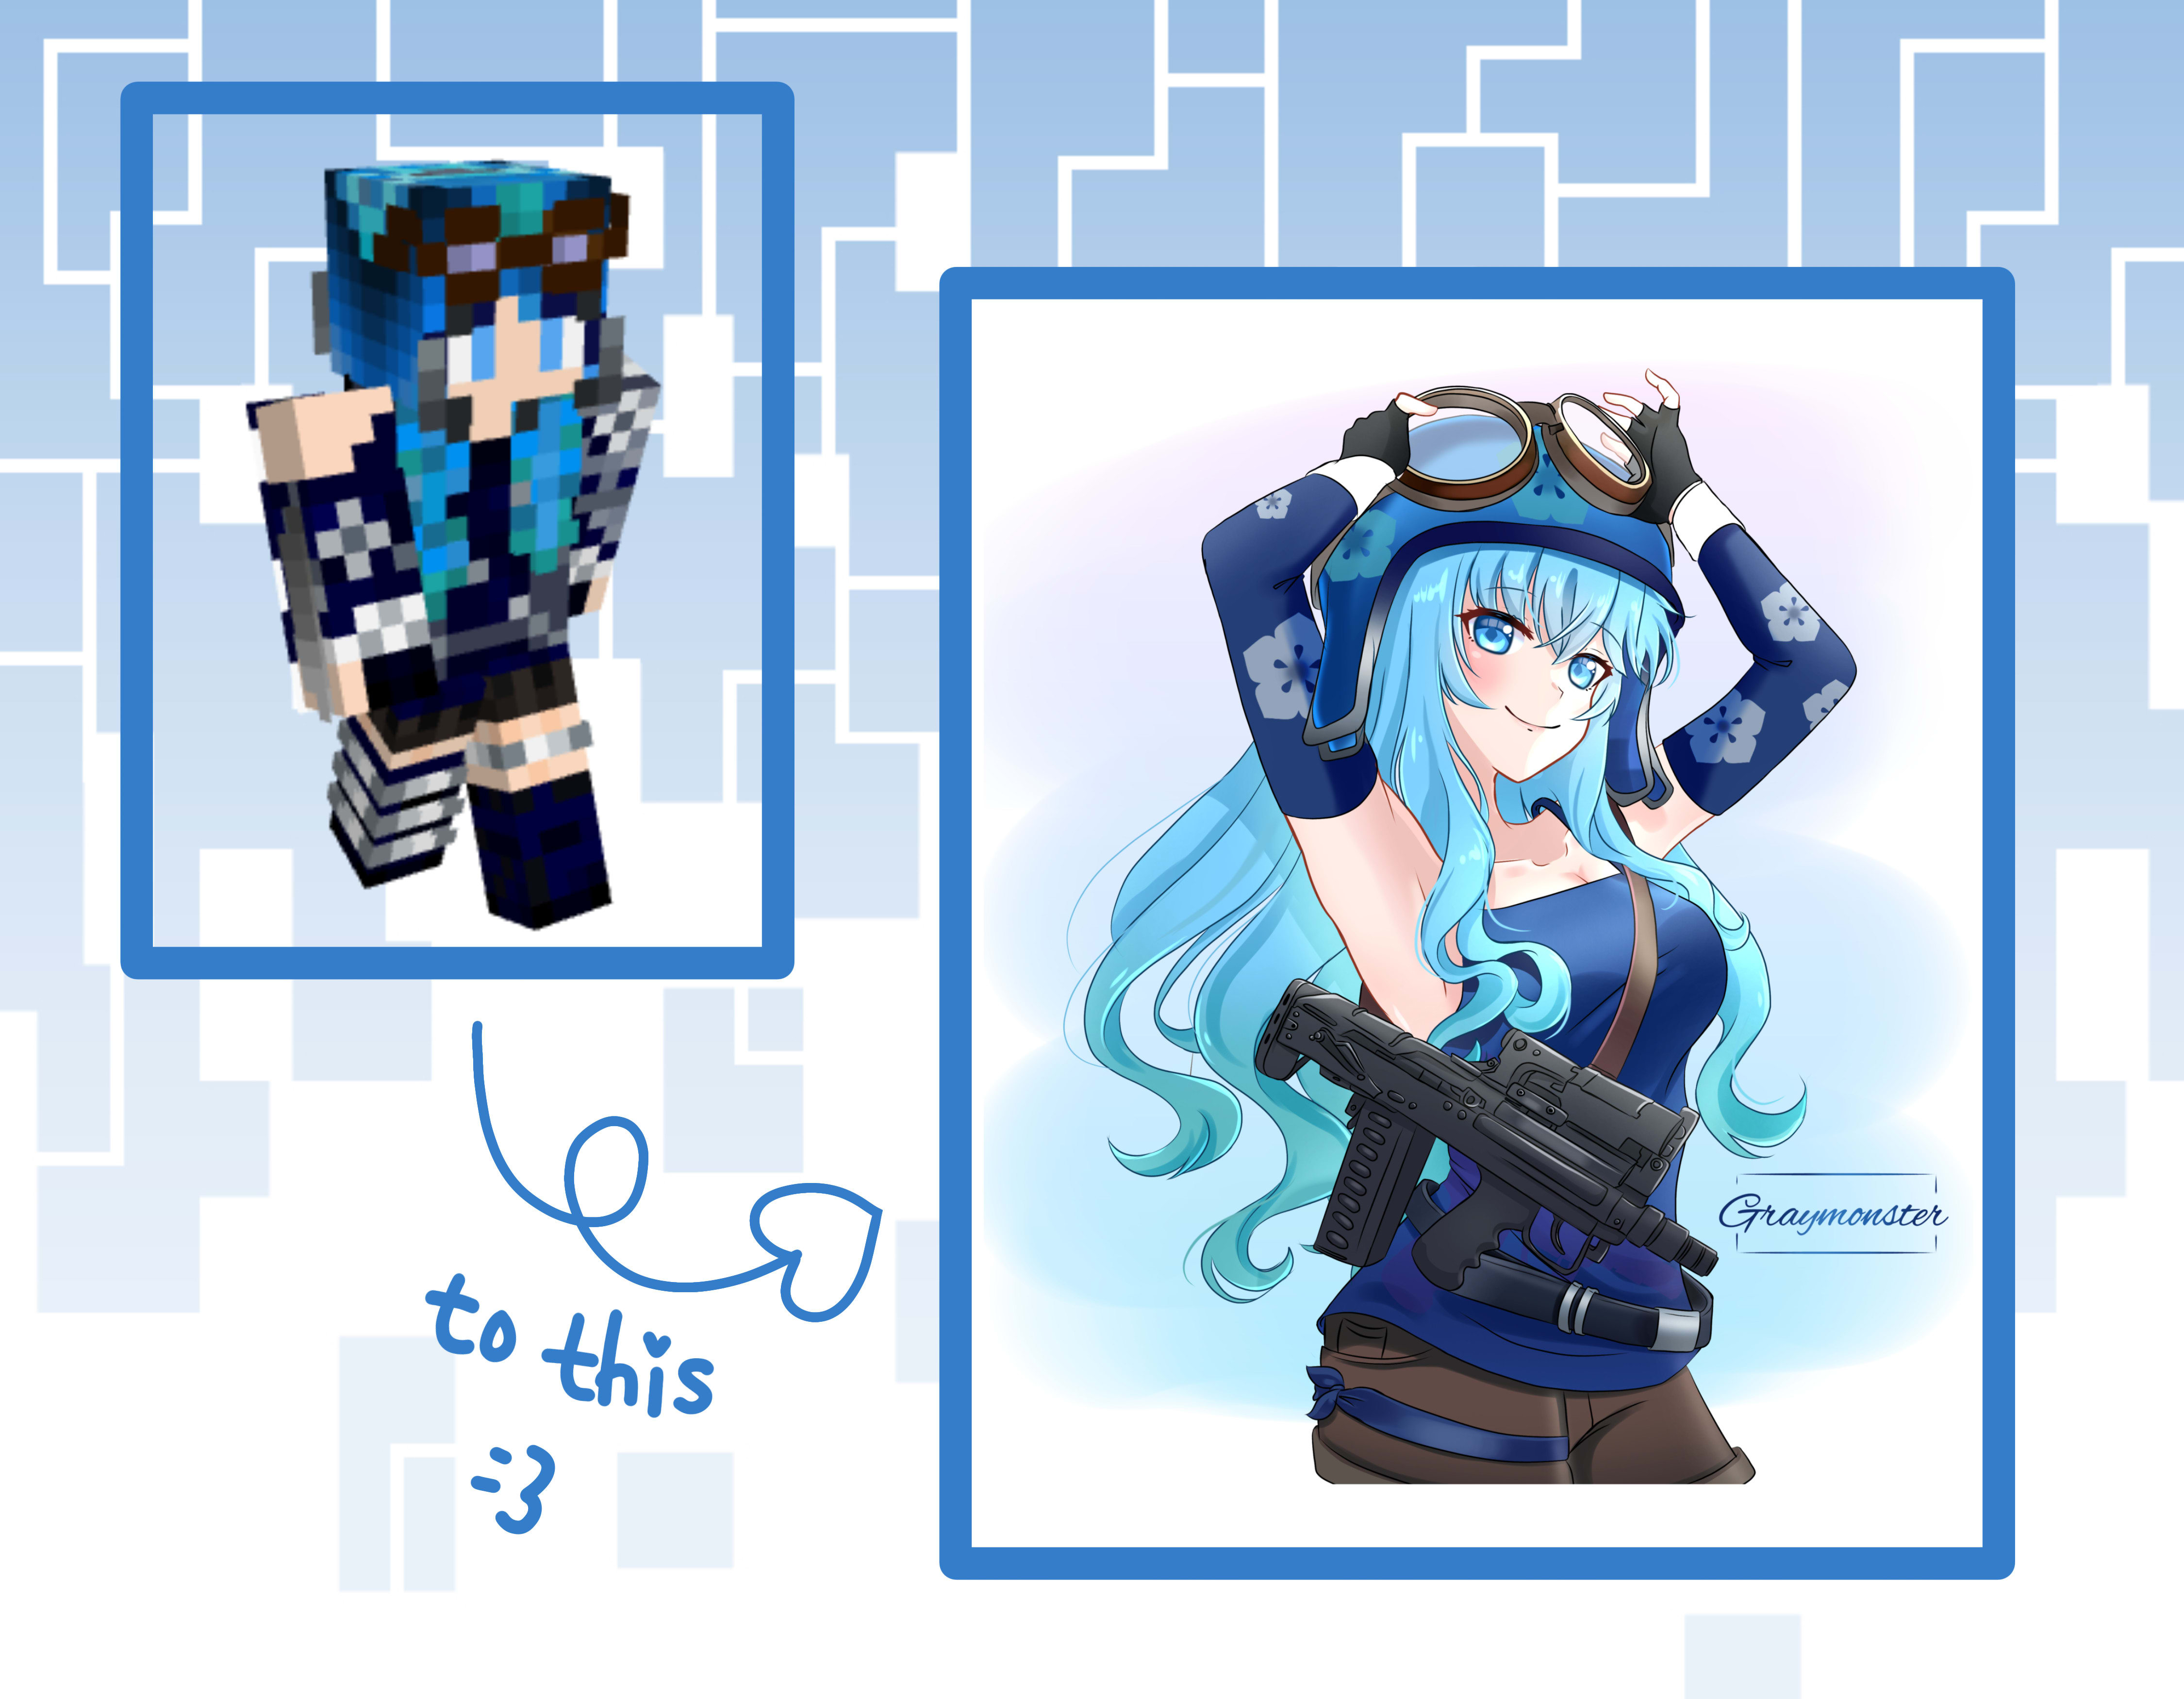 Draw your minecraft skin or roblox avatar my anime style by Tanpeiii